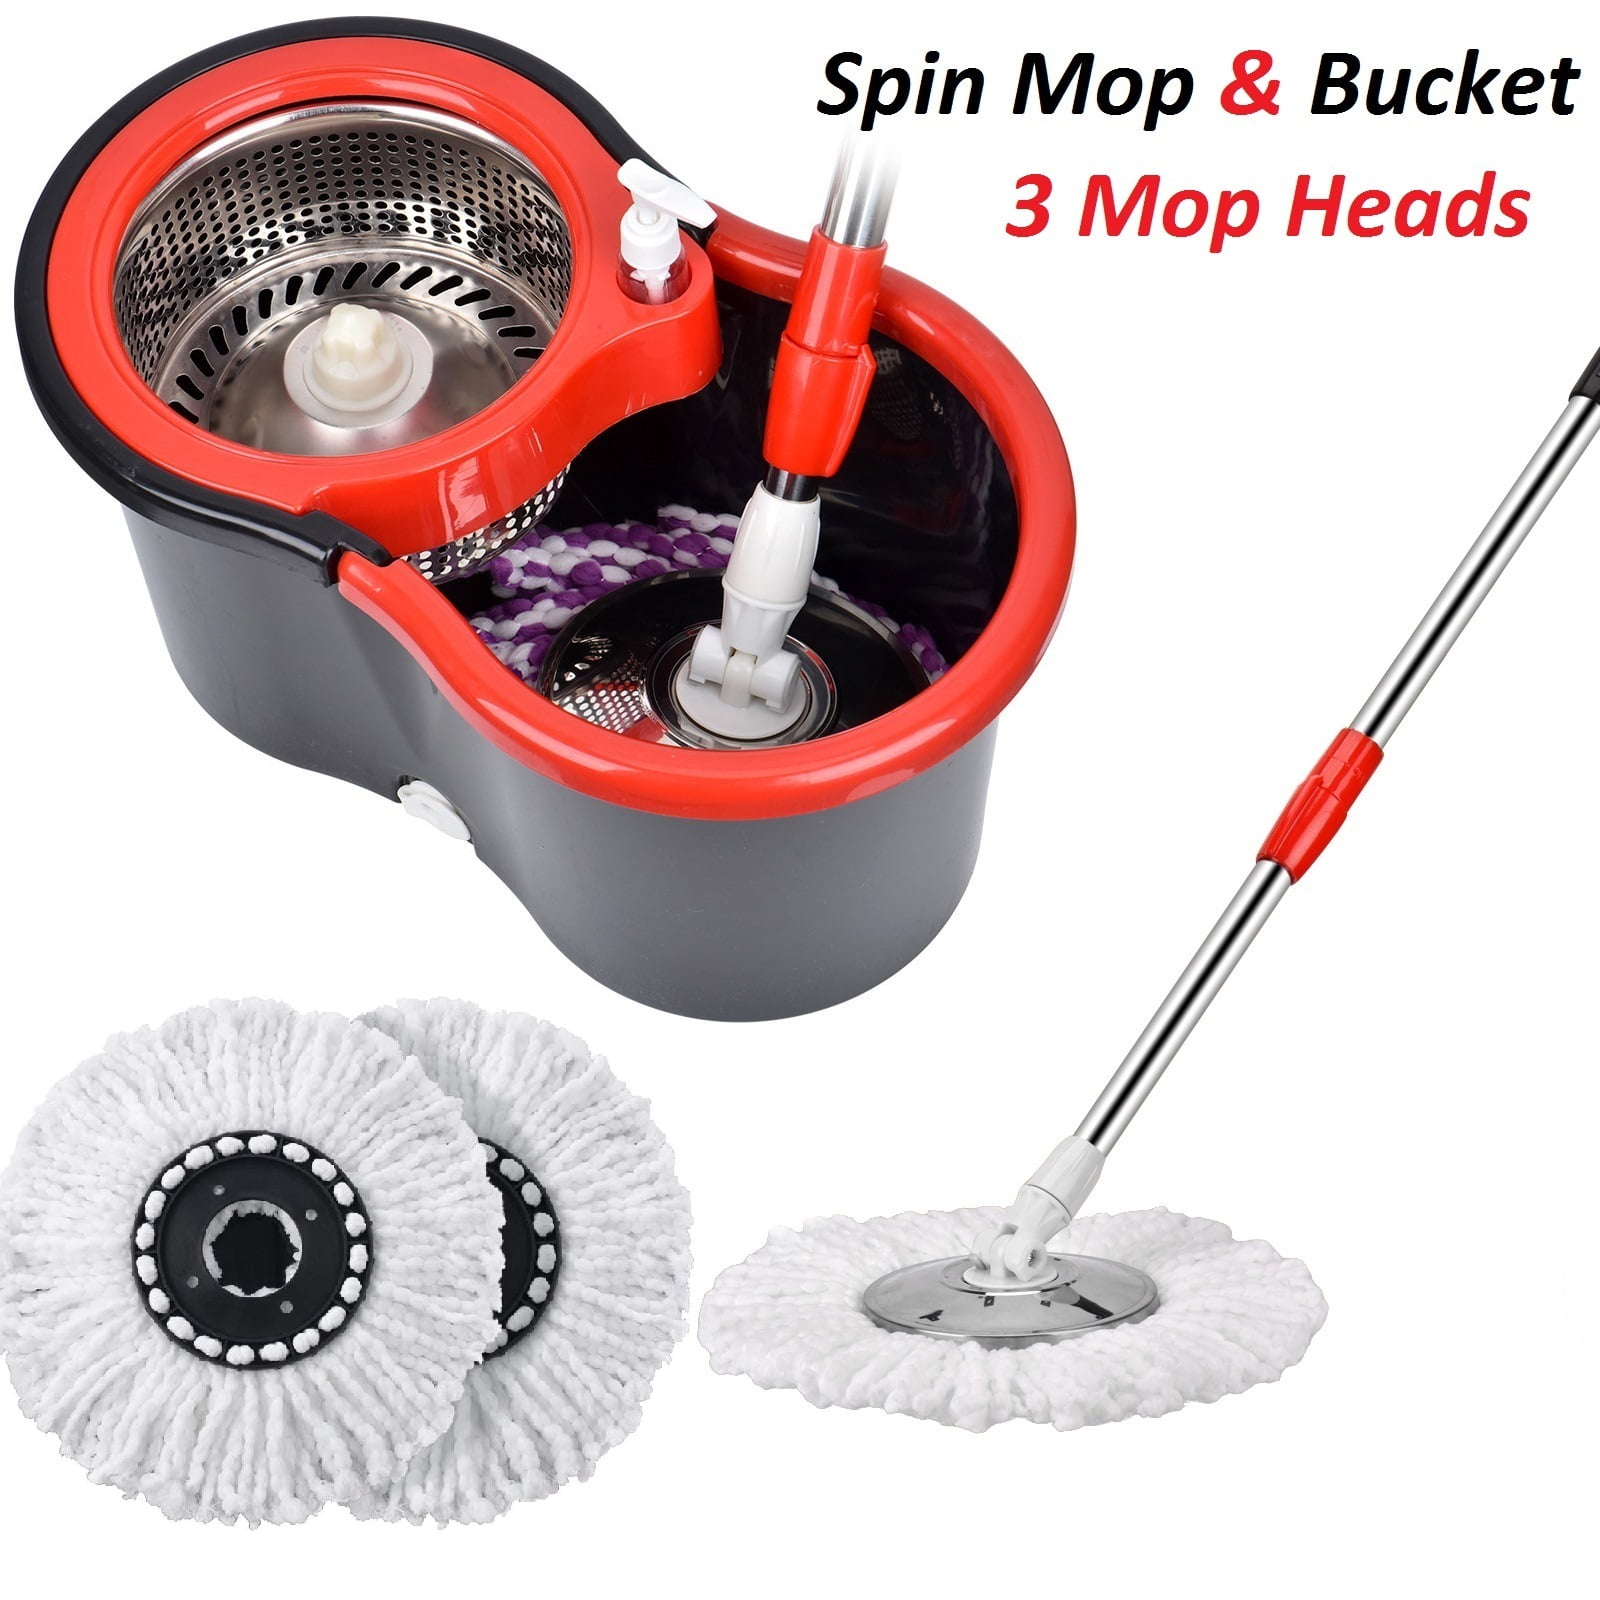 Spin with Bucket, Mop and Bucket with Wringer Floor Mop Set 360 Spin Mop System 3 Mop Heads for Floor Black & Red - Walmart.com